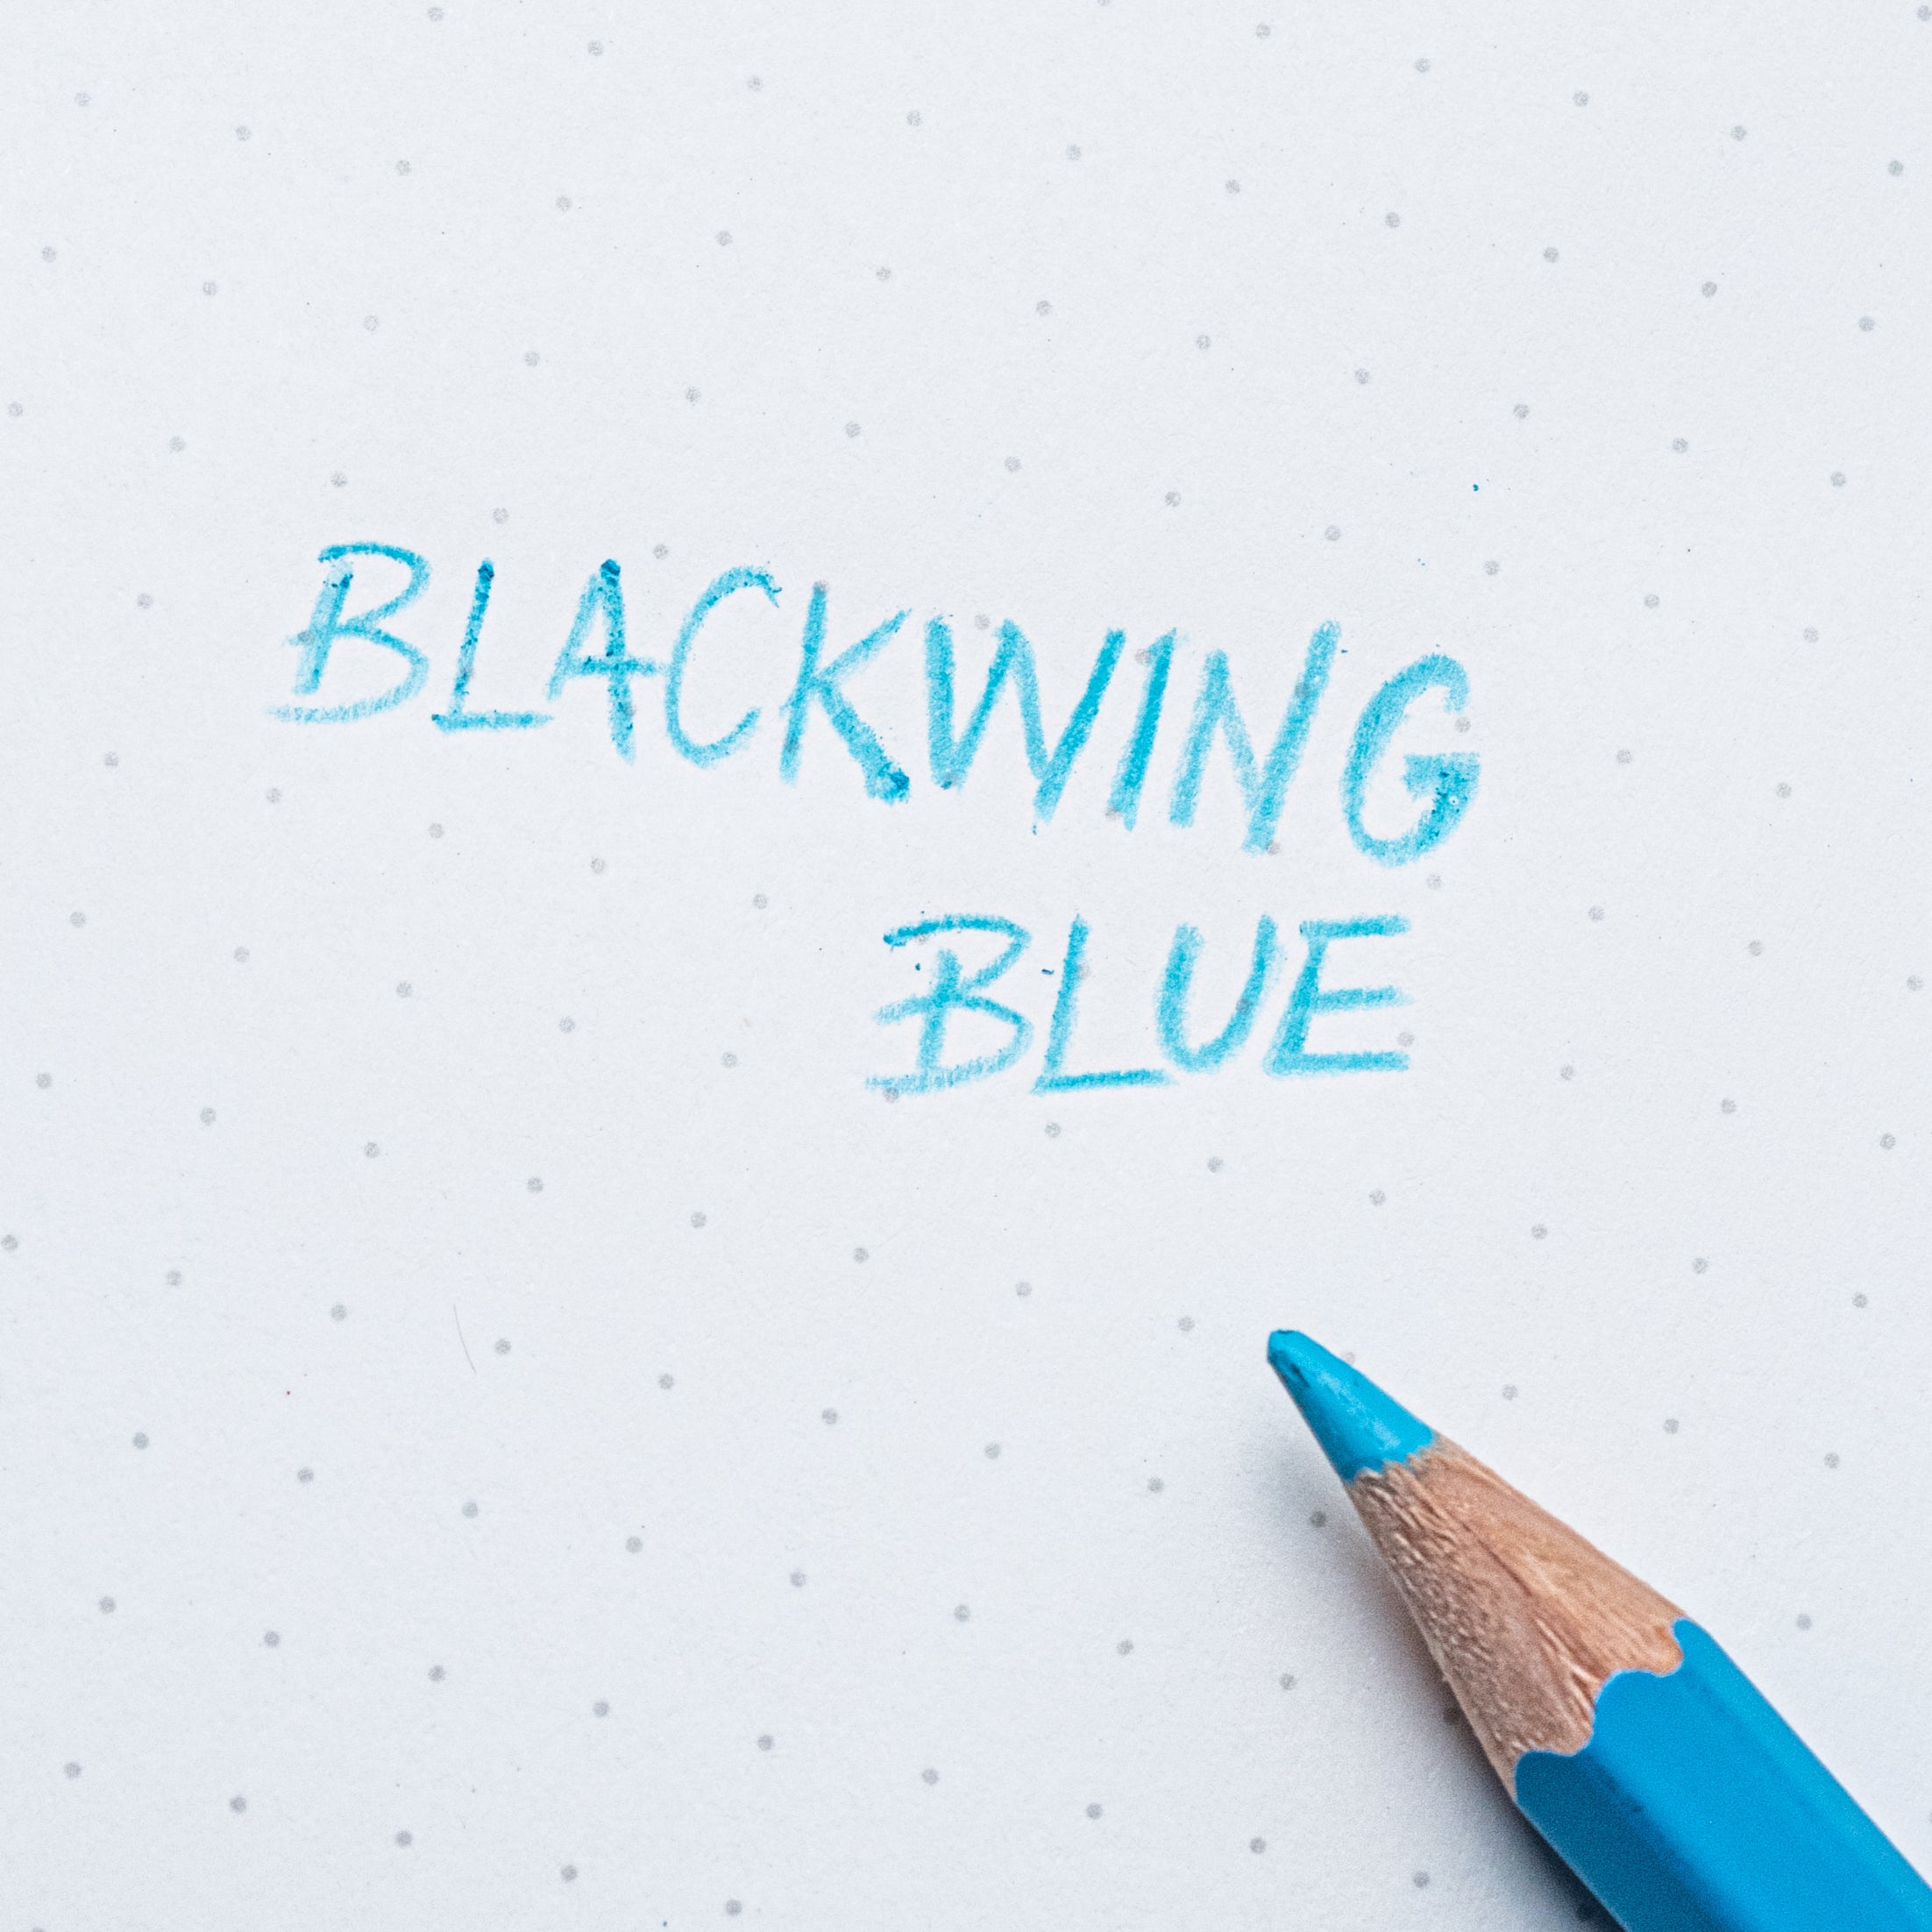 A Blackwing Blue pencil with a blue non-photo core, perfect for scans.